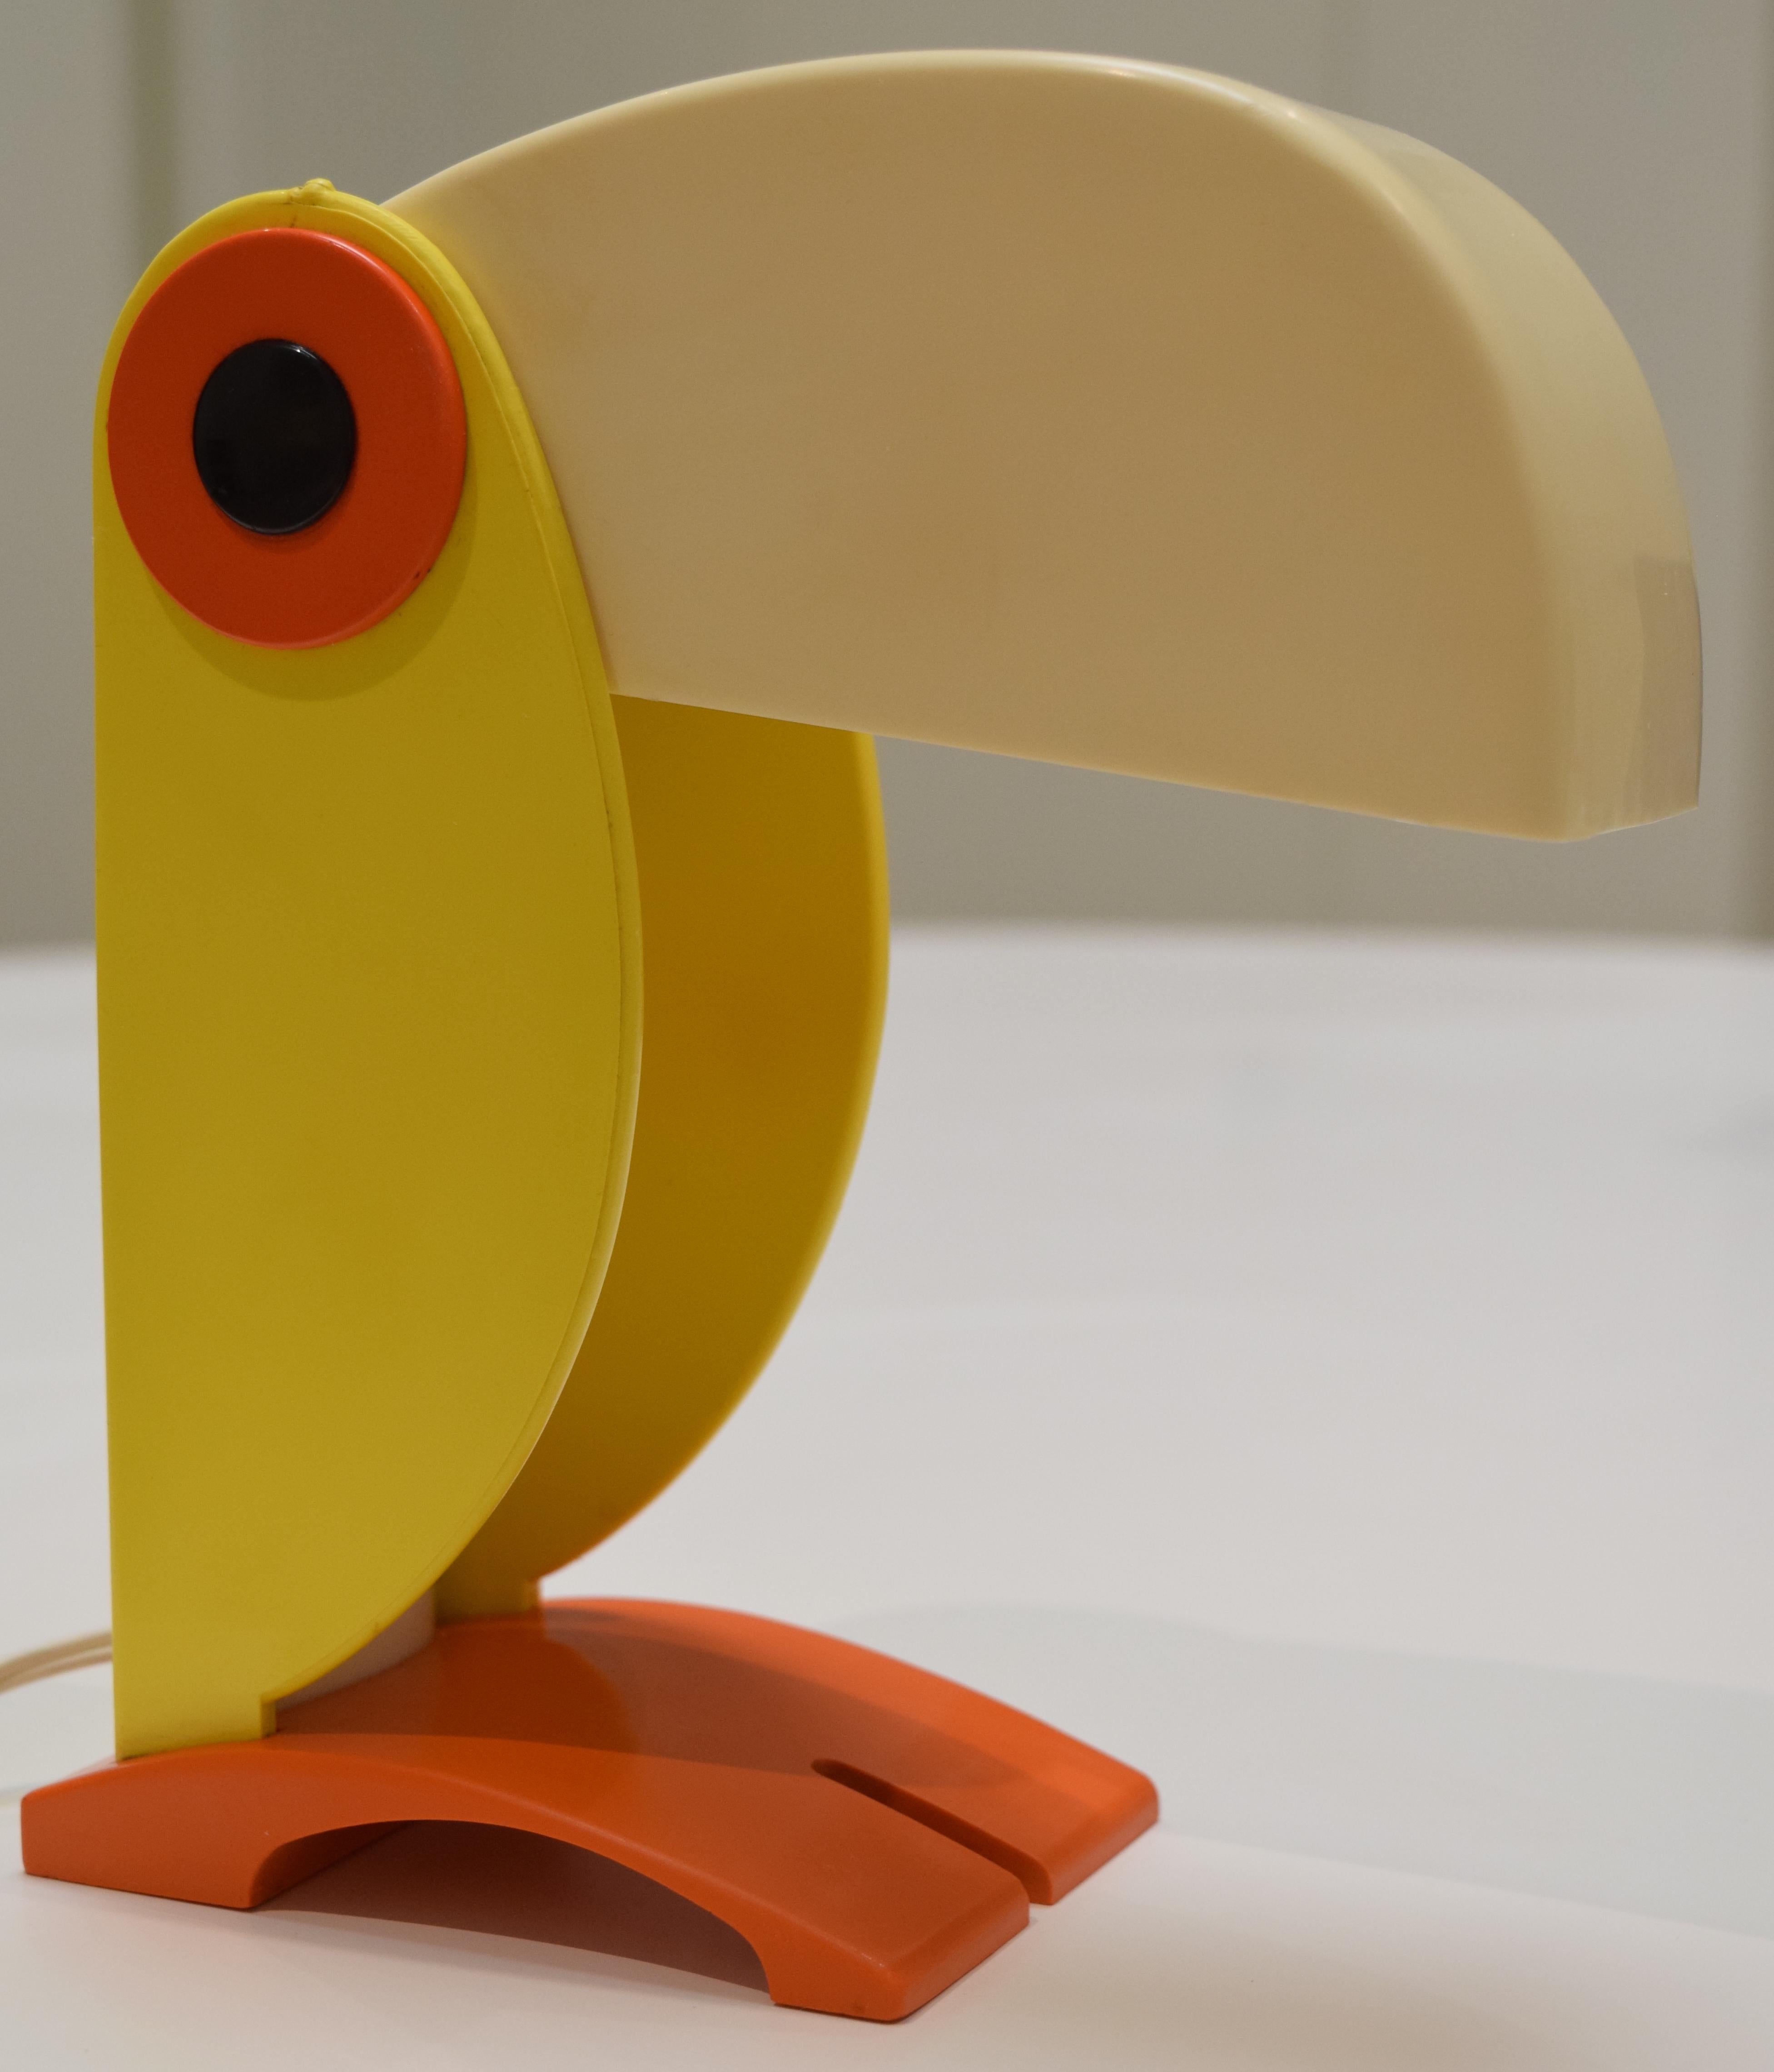 Store closing-- last day is 7/31. Offers welcome! Classic Italian toucan lamp in orange and yellow by Old Timer Ferrari. Signed to base. Measures: 7.5